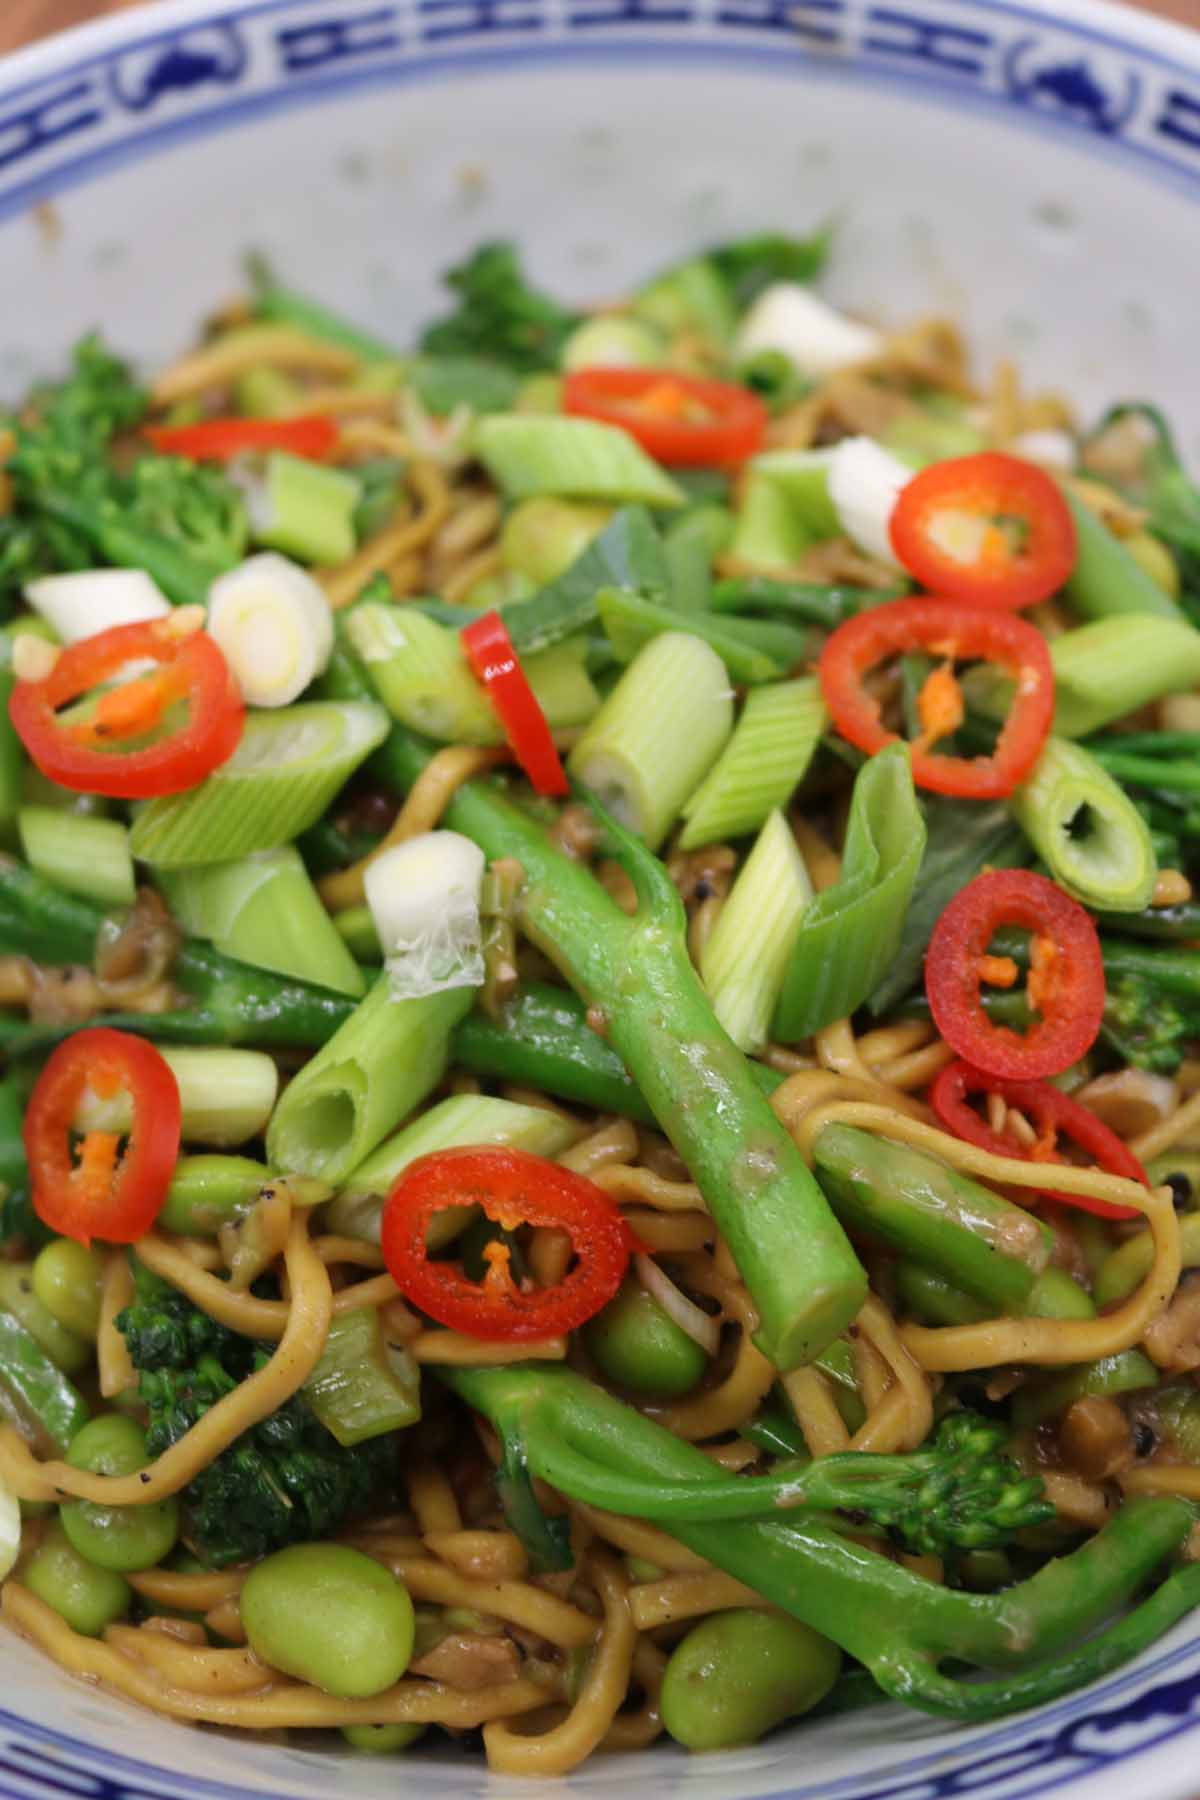 Spicy Peanut and Szechuan Pepper Noodles, Spicy Peanut and Szechuan Pepper Noodles